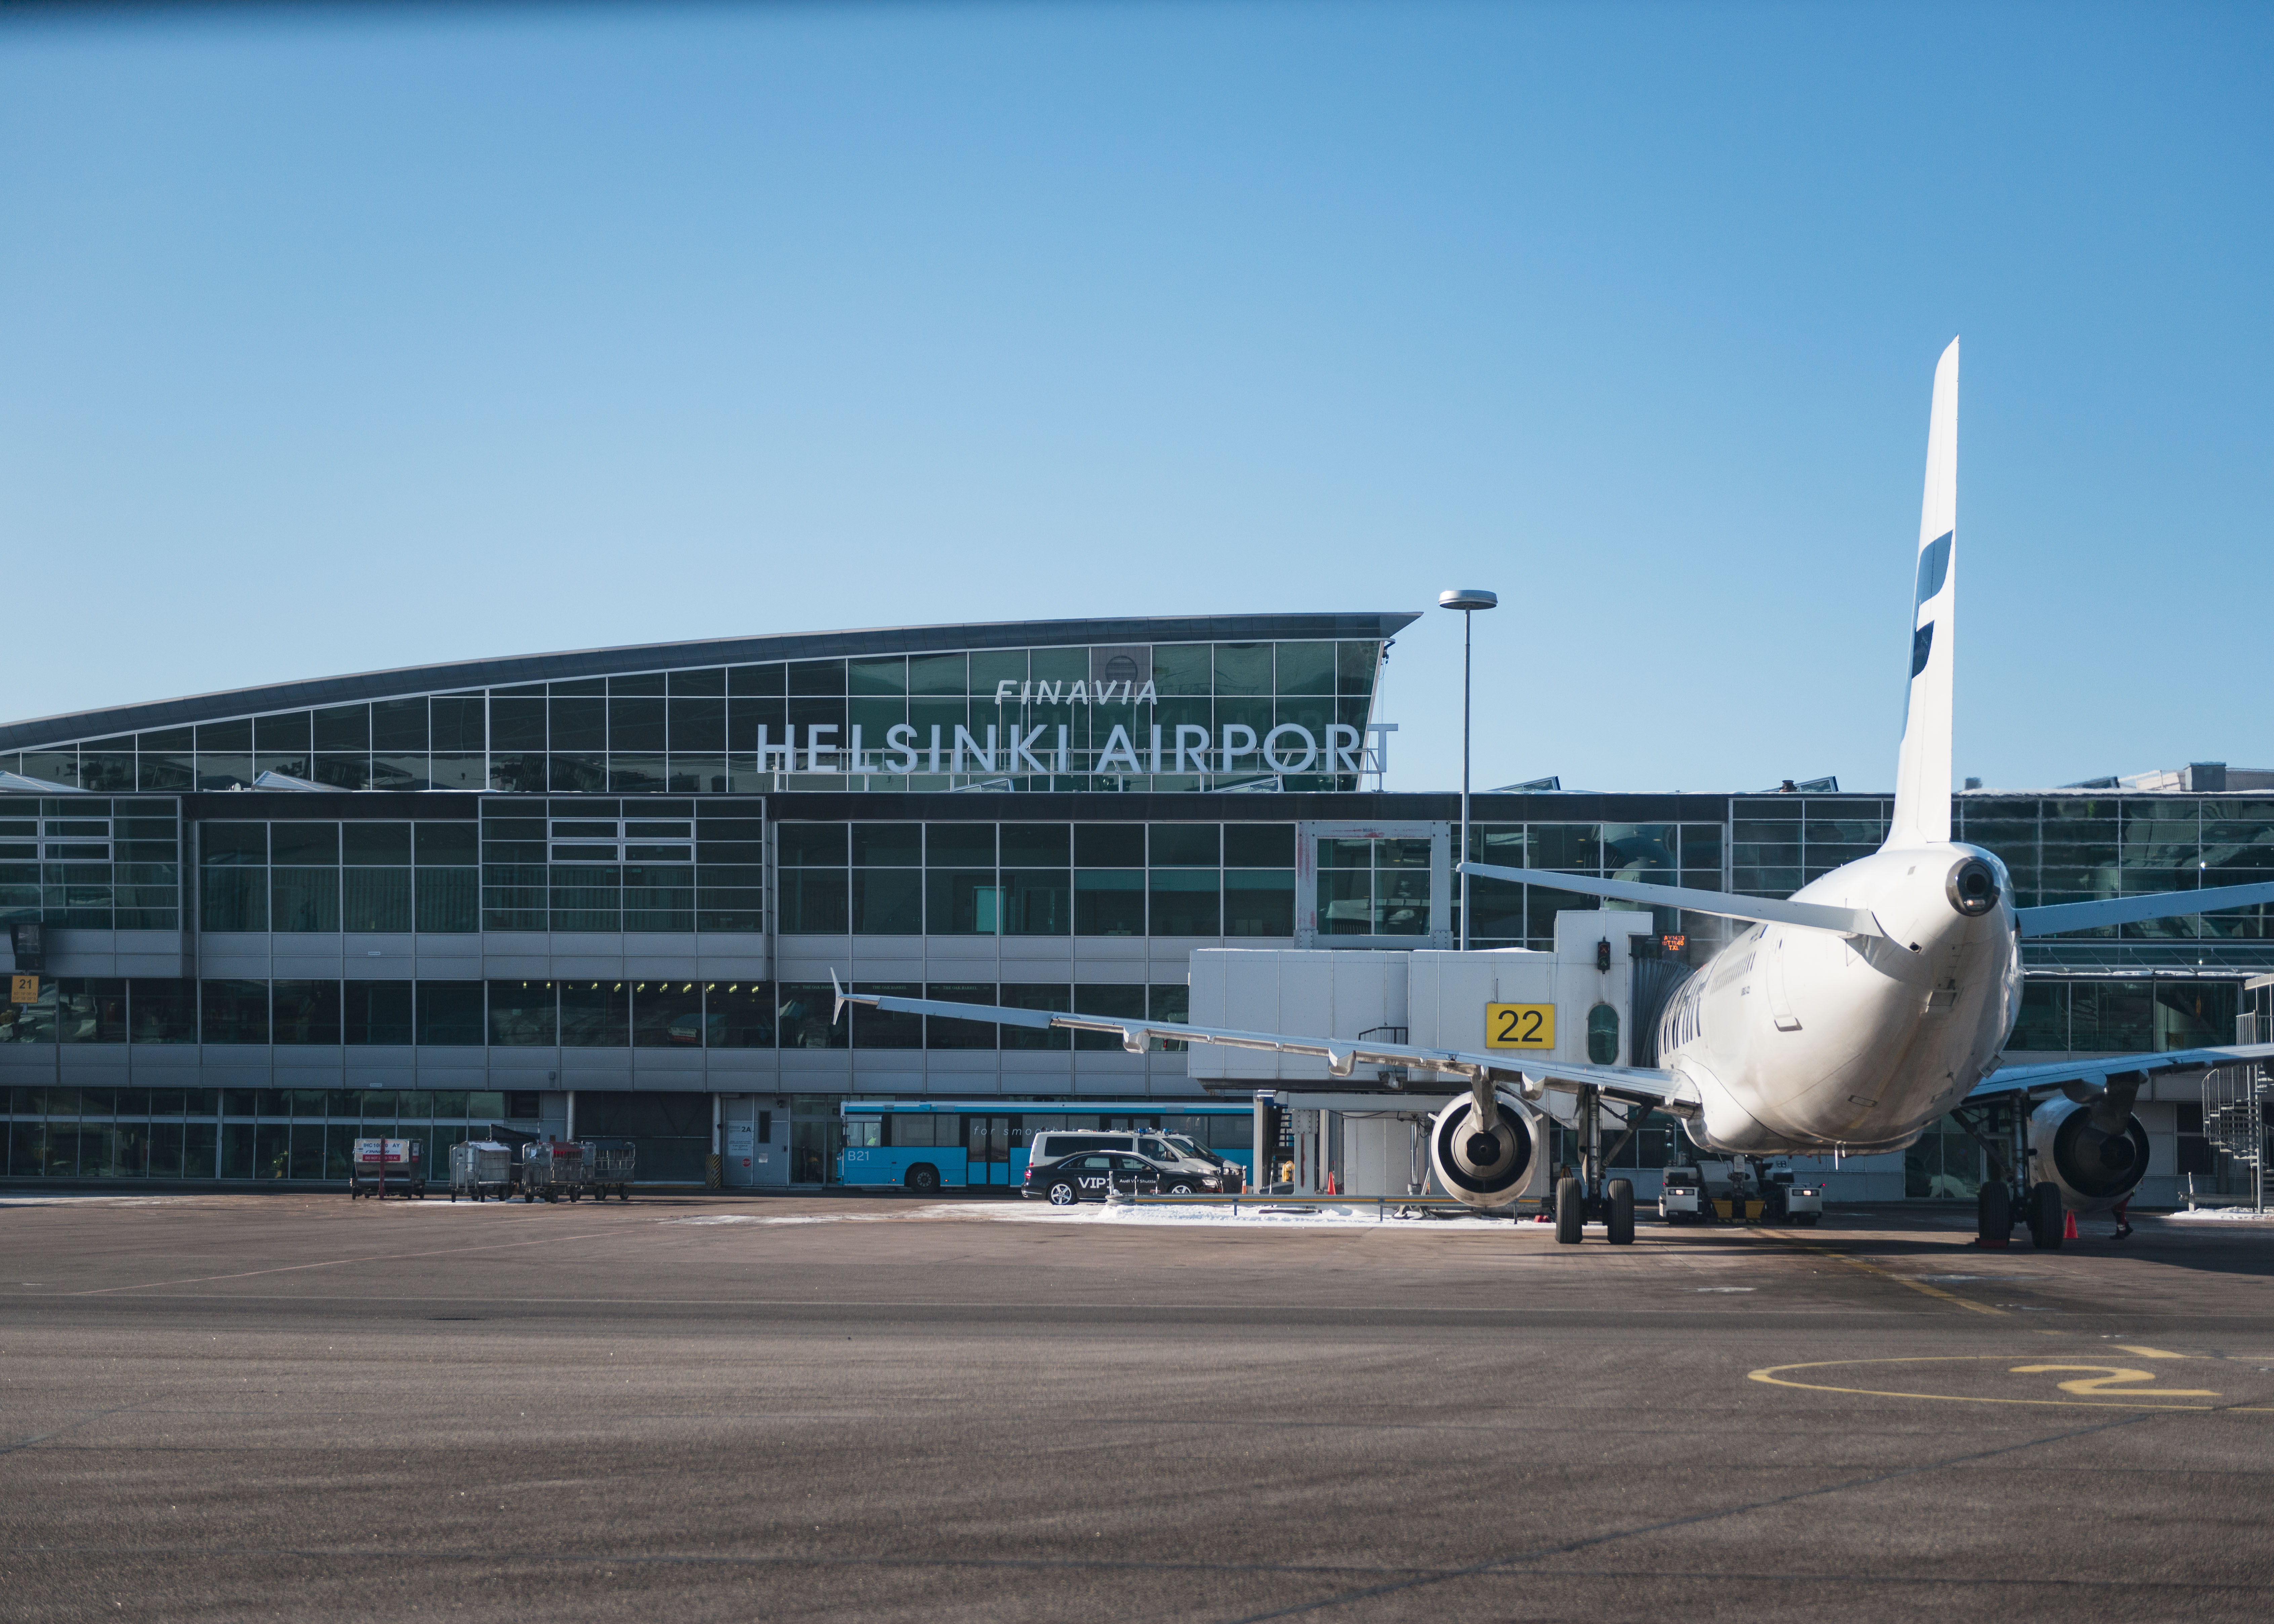 Helsinki Airport has come out on top in a recent airport awards study